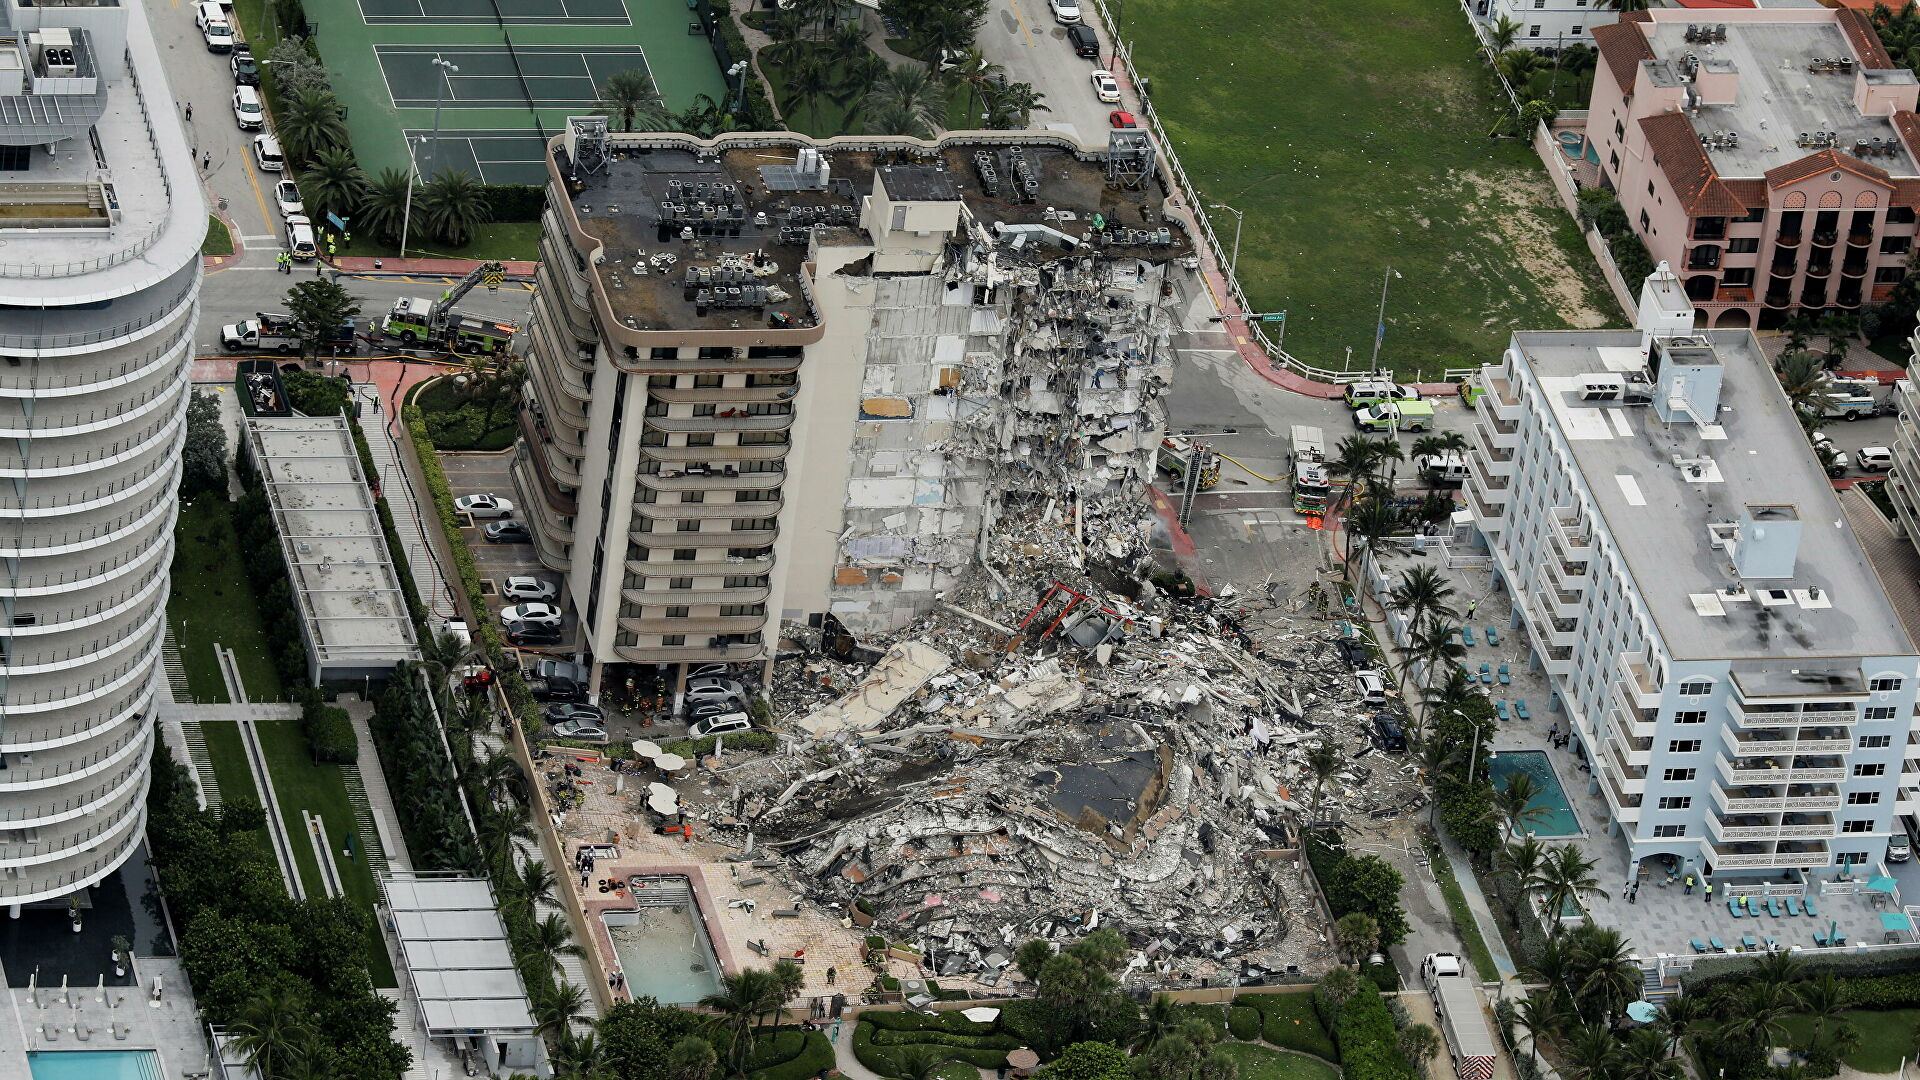 Death toll from collapsed Florida condo tower rises to 64